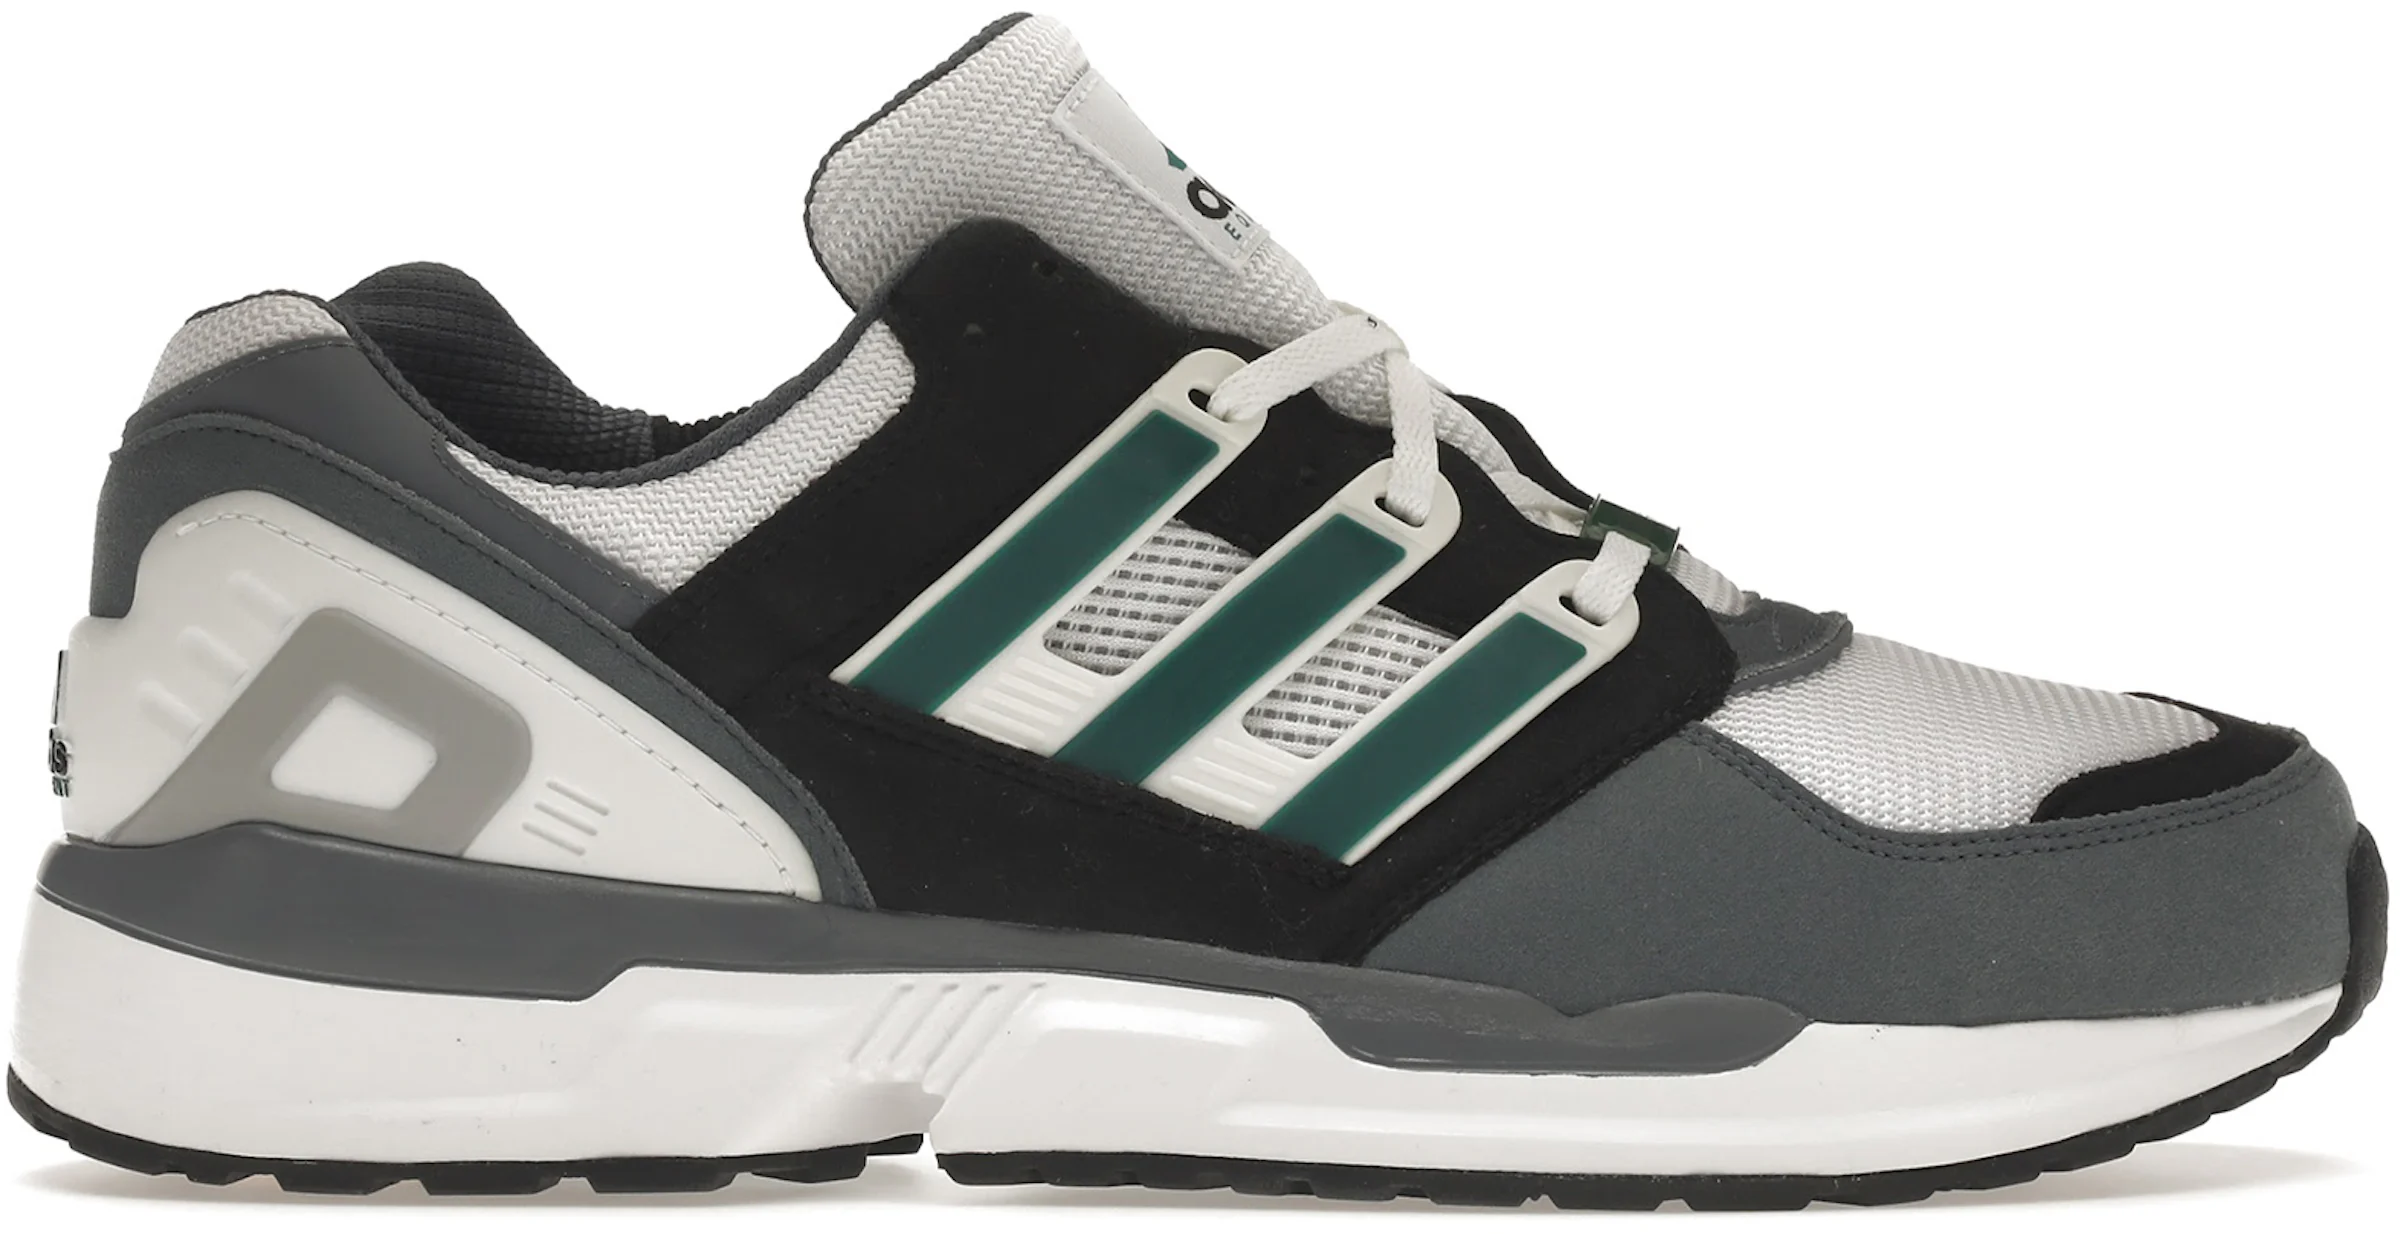 https://images.stockx.com/images/adidas-EQT-Running-Support-White-Green-Lead-Product.jpg?fit=fill&bg=FFFFFF&w=1200&h=857&fm=webp&auto=compress&dpr=2&trim=color&updated_at=1650479311&q=60